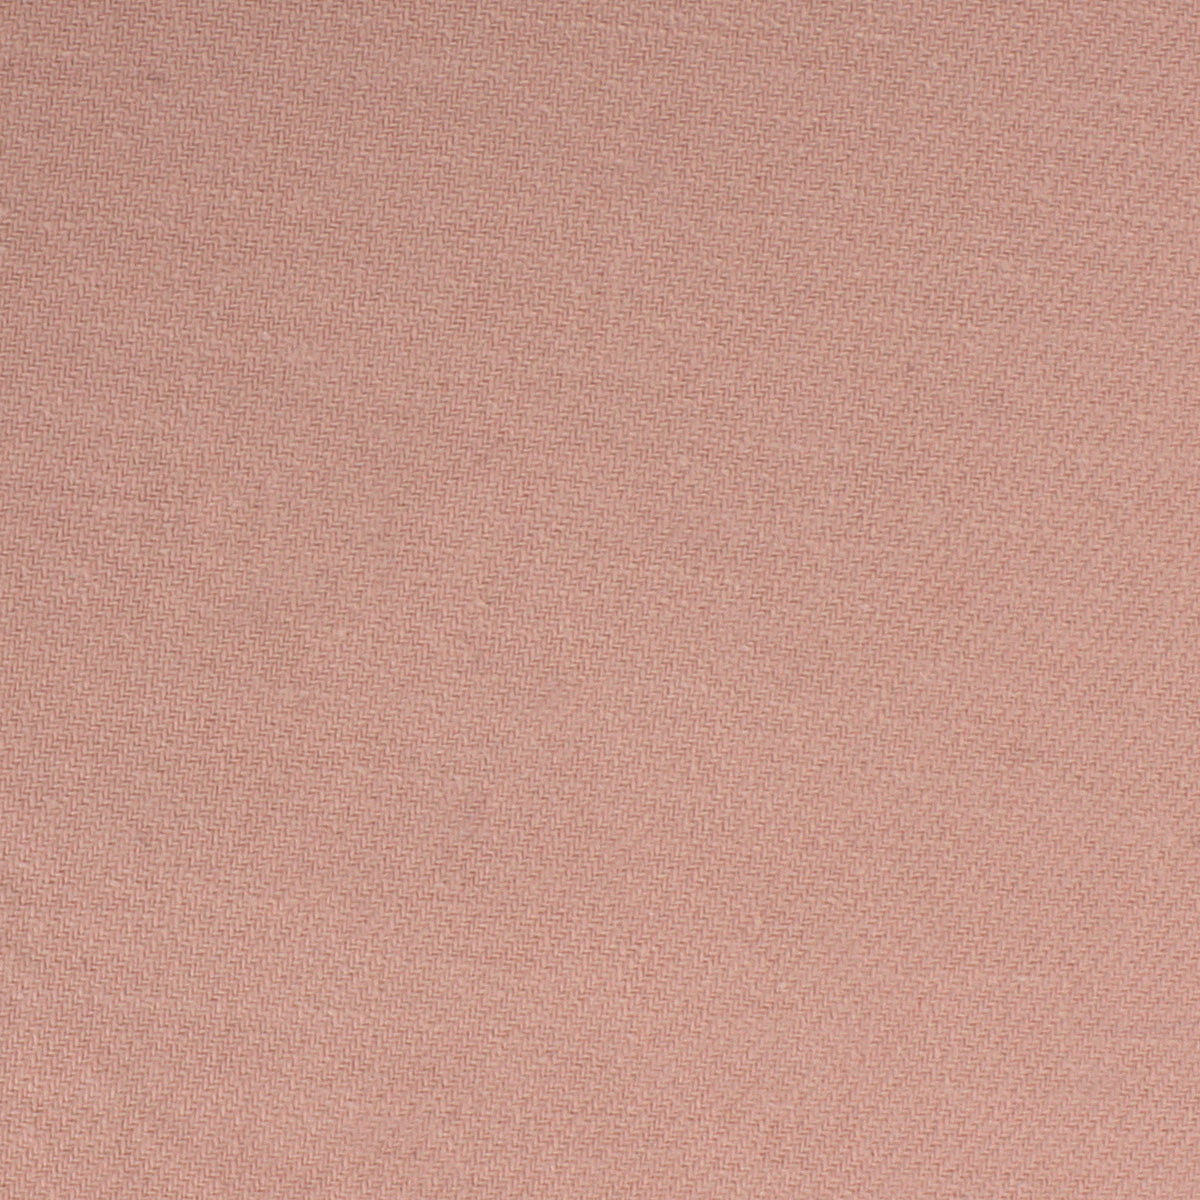 Dusty Rose Pink Fabric Swatch